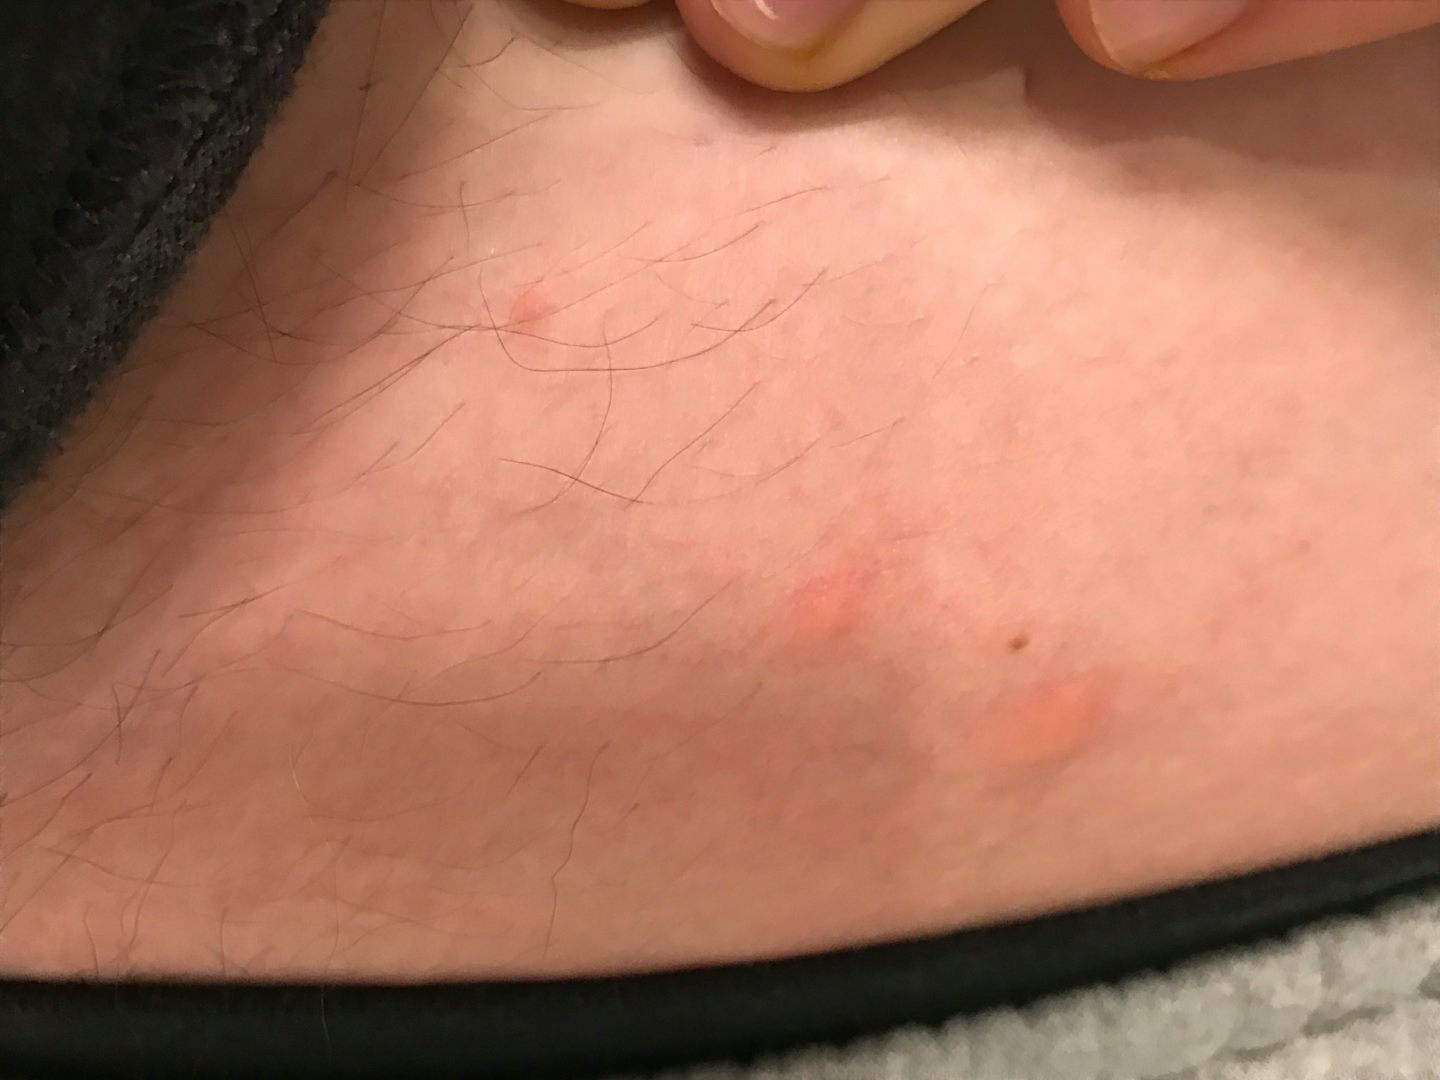 Bed bug Bites, the ol' 3 in a line